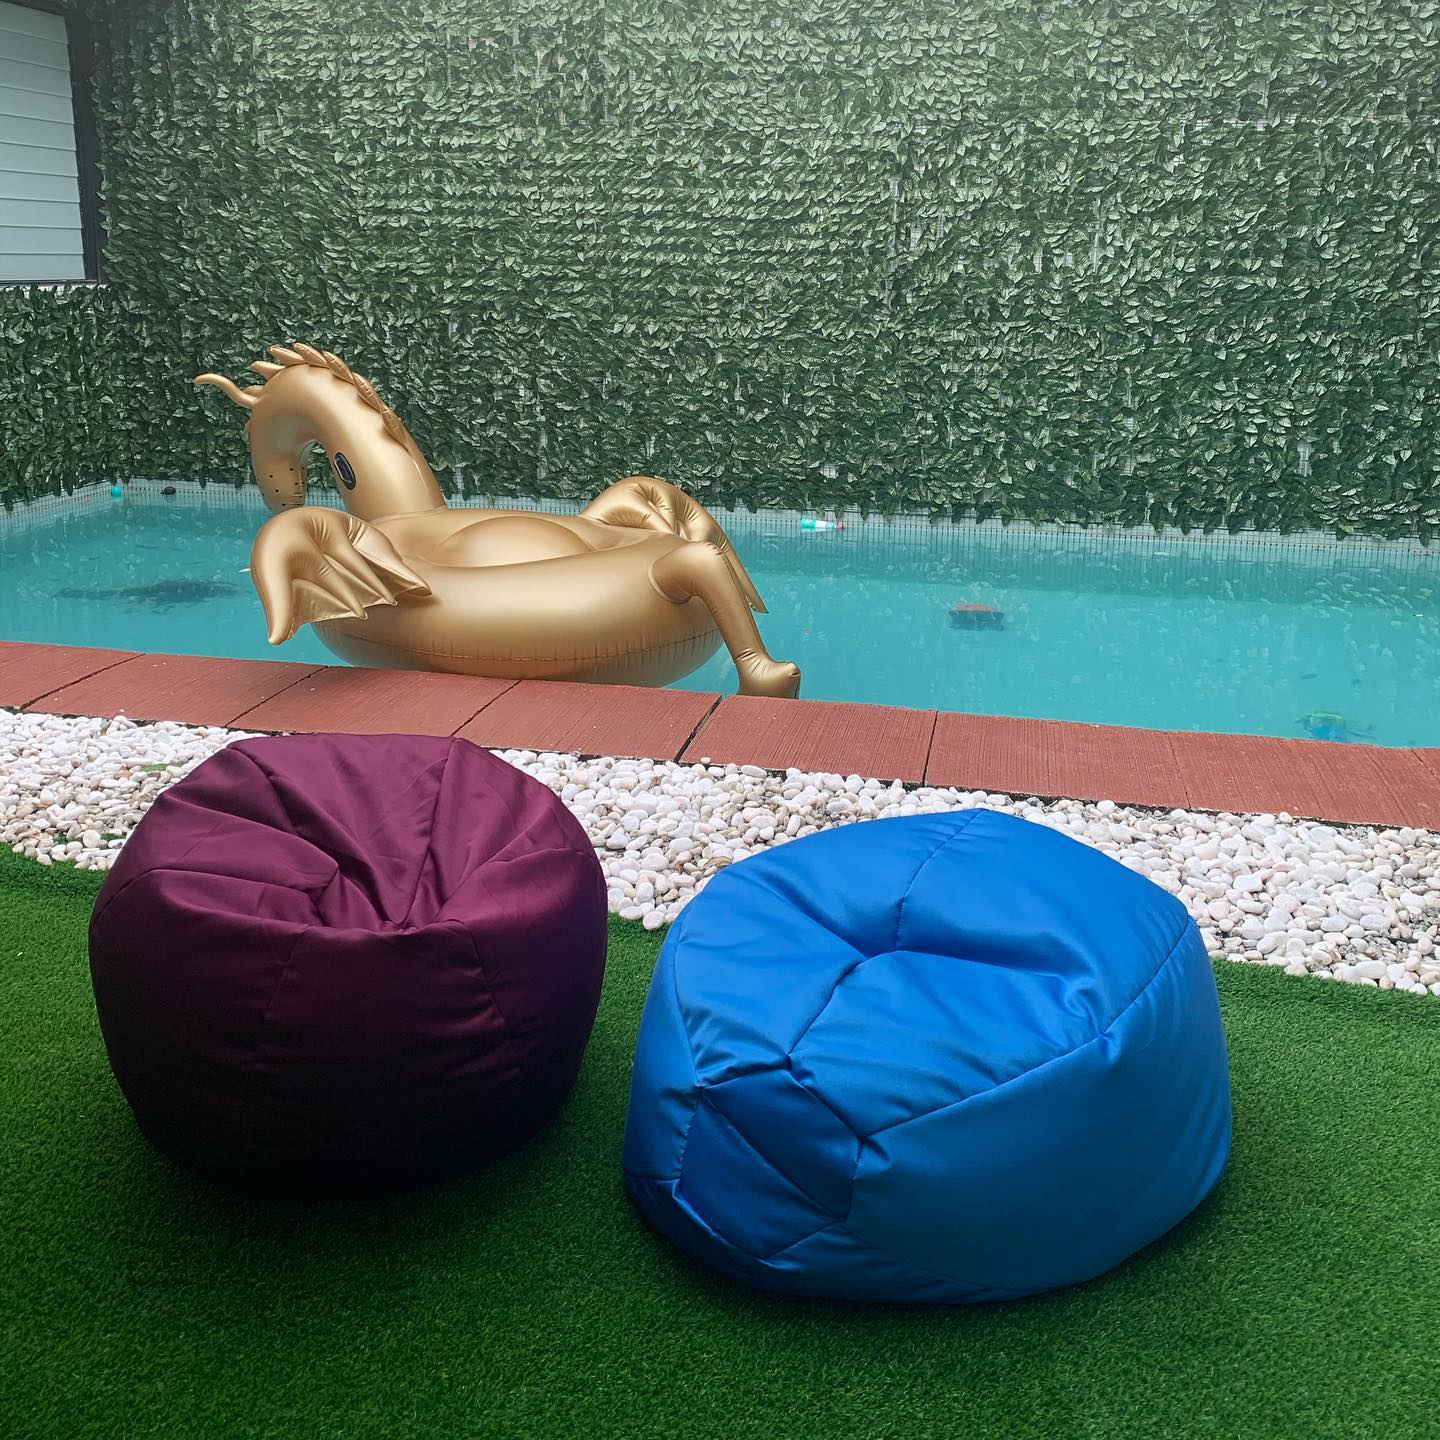 Everything You Need to Know About Bean Bags (And Our Top 5 Choices)